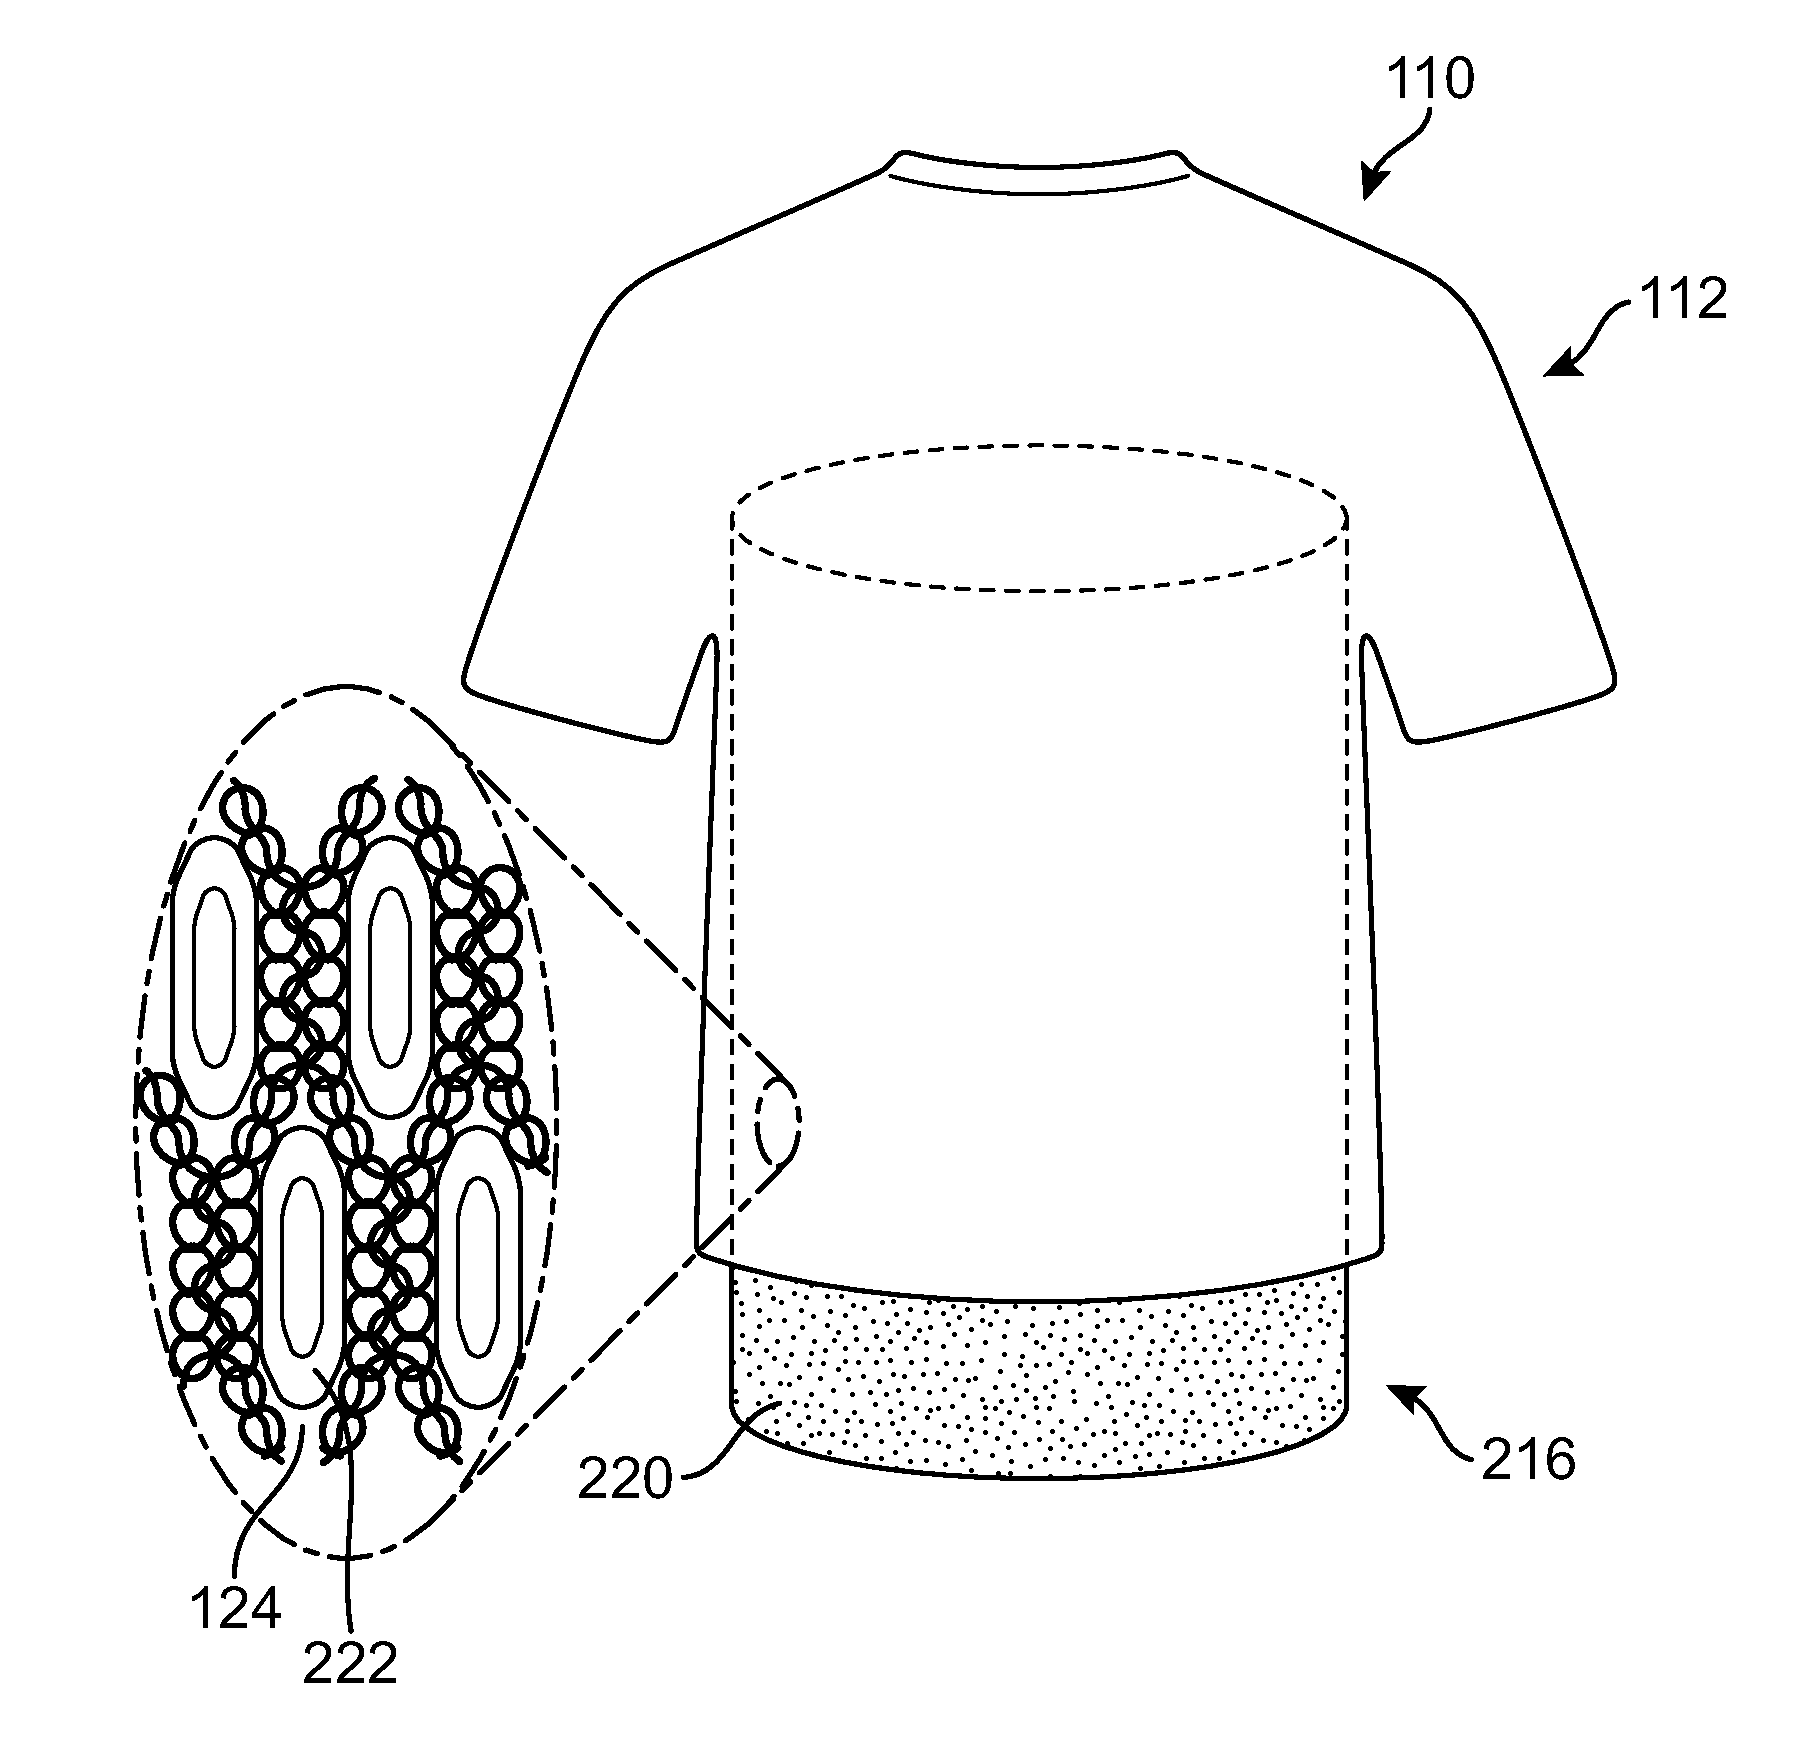 Knit article of apparel and apparel printing system and method